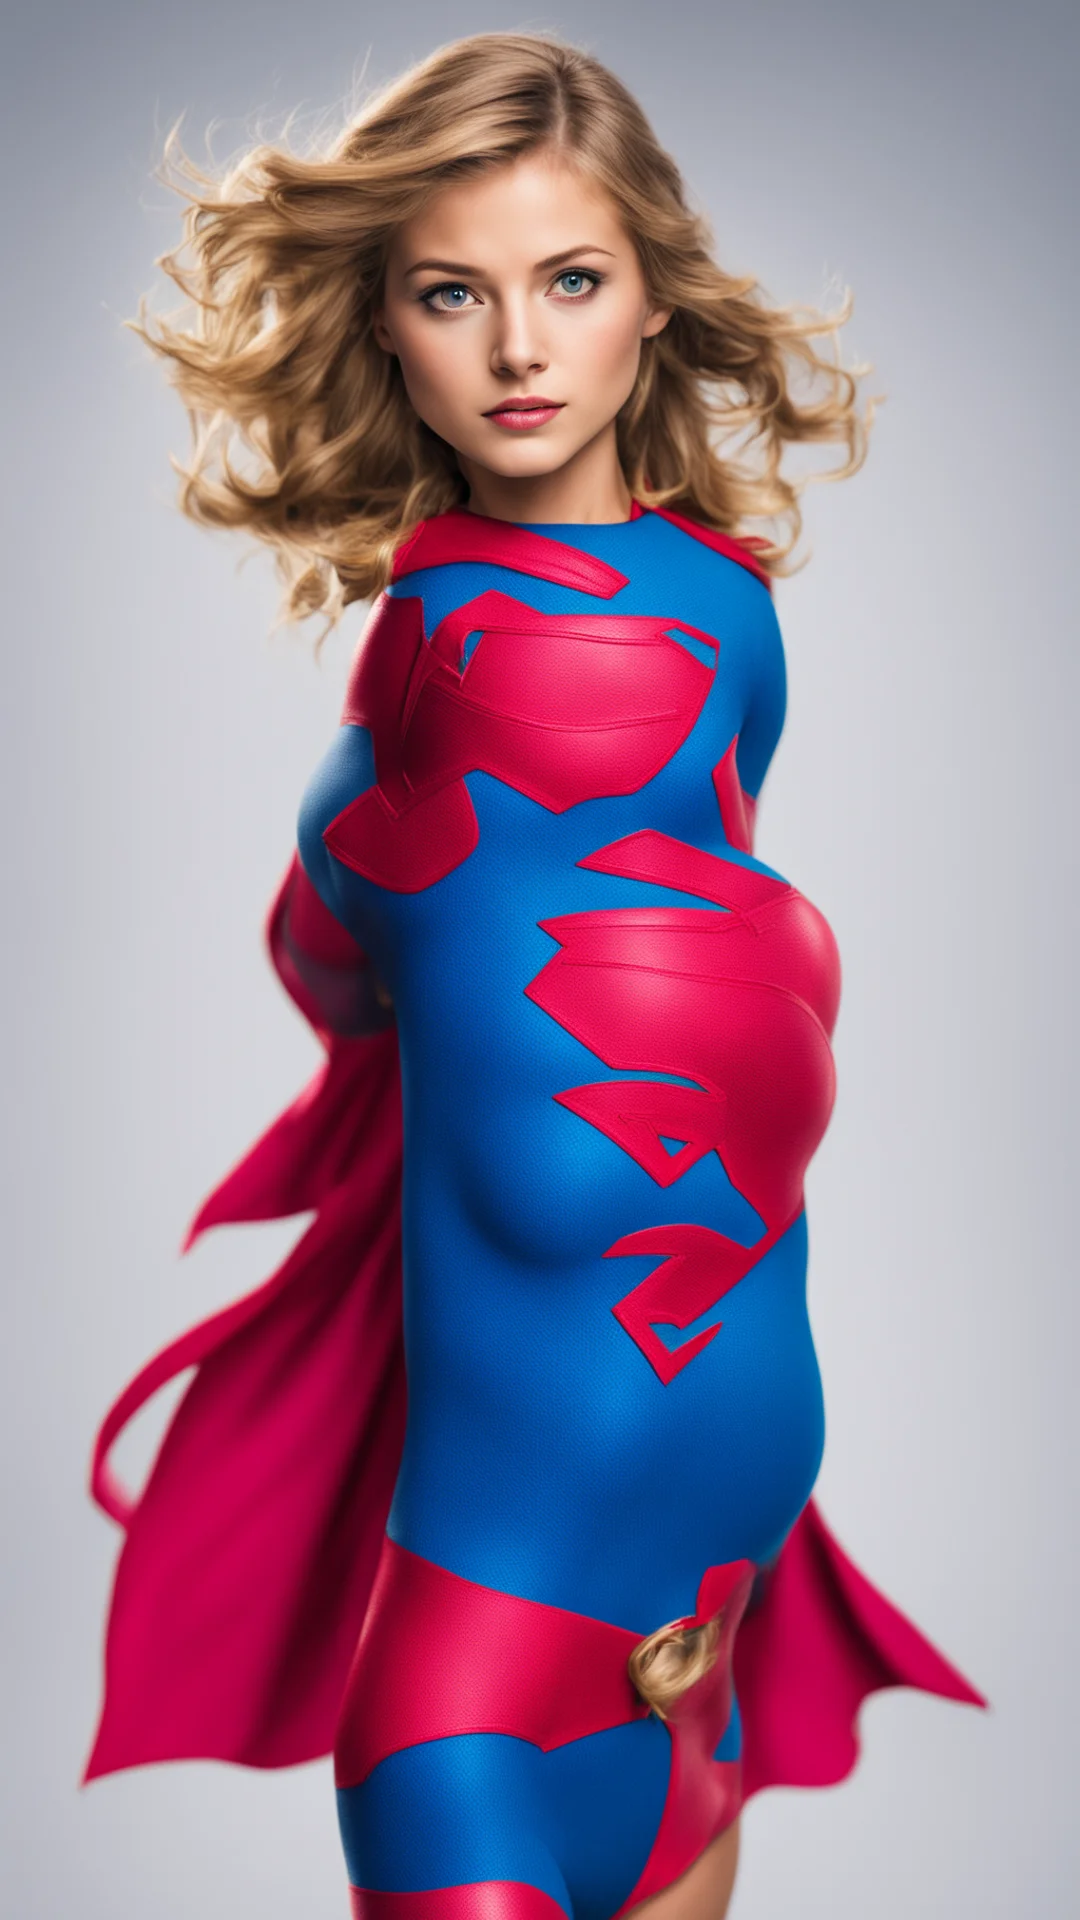 super girl amazing awesome portrait 2 tall